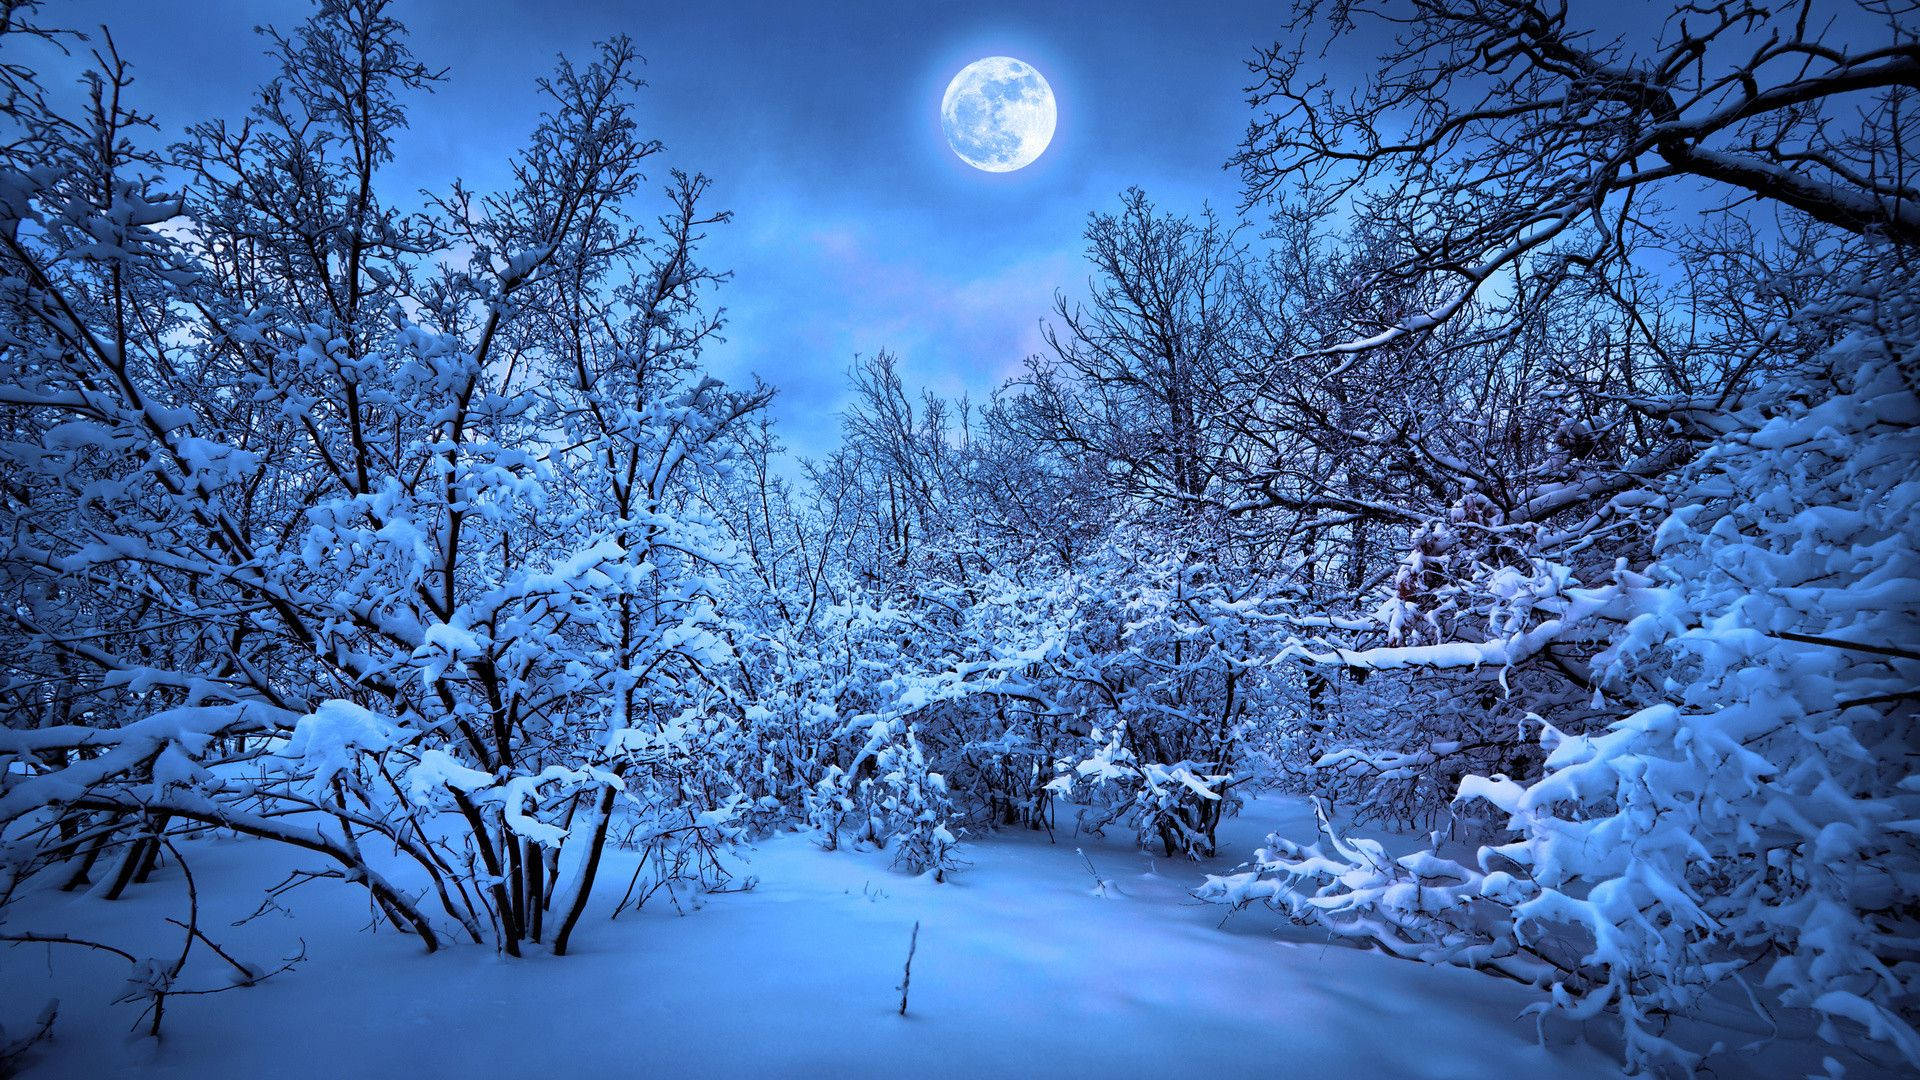 A Snowy Forest With A Full Moon Background